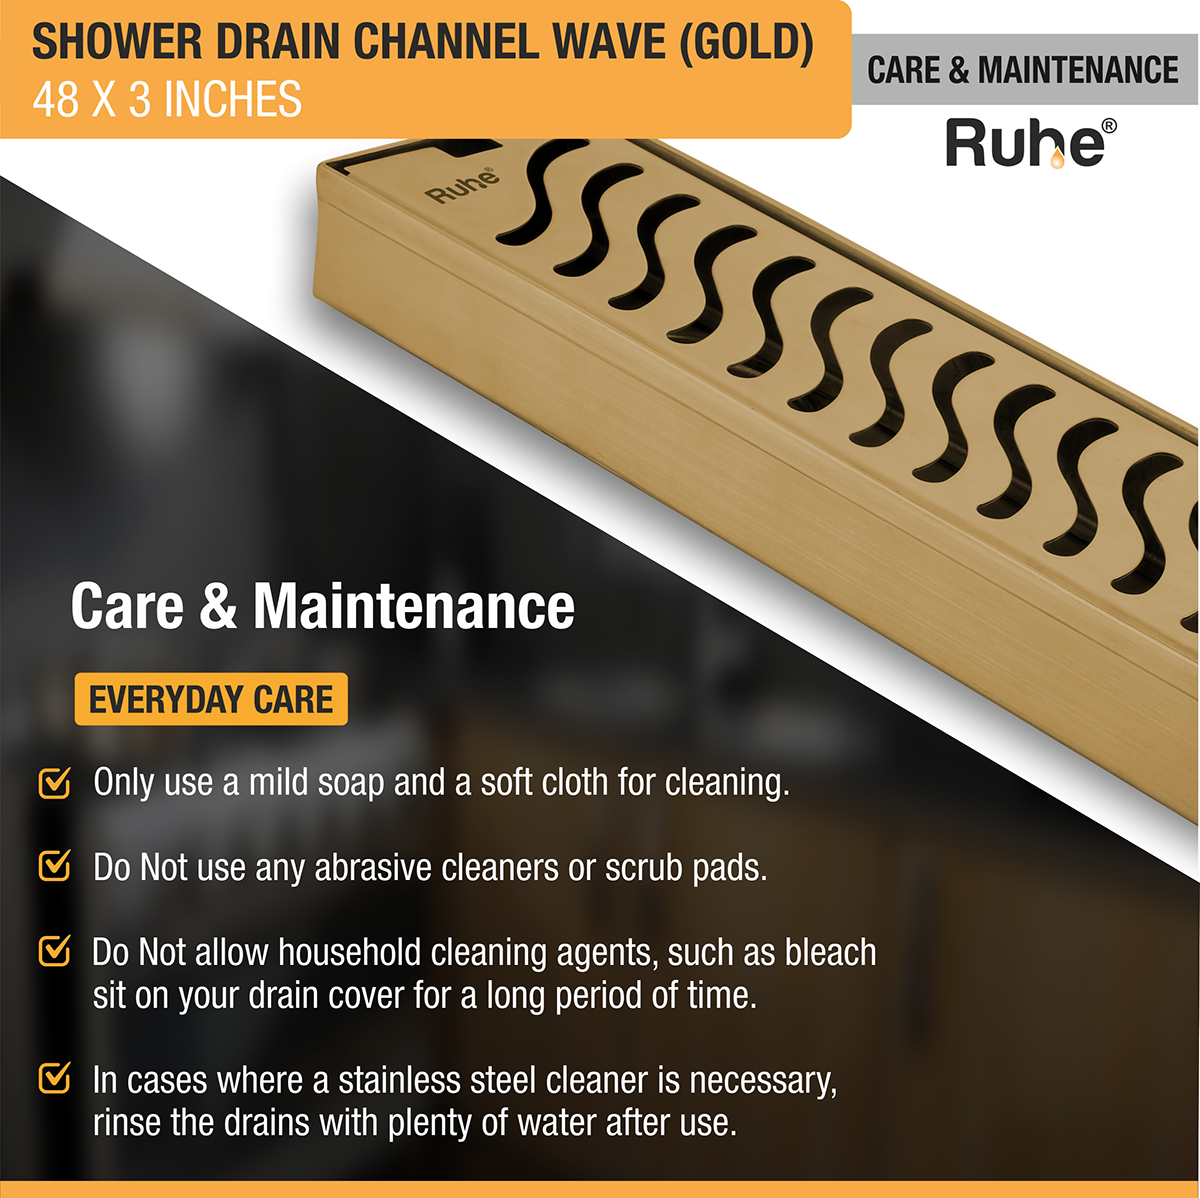 Wave Shower Drain Channel (48 x 3 Inches) YELLOW GOLD care and maintenance